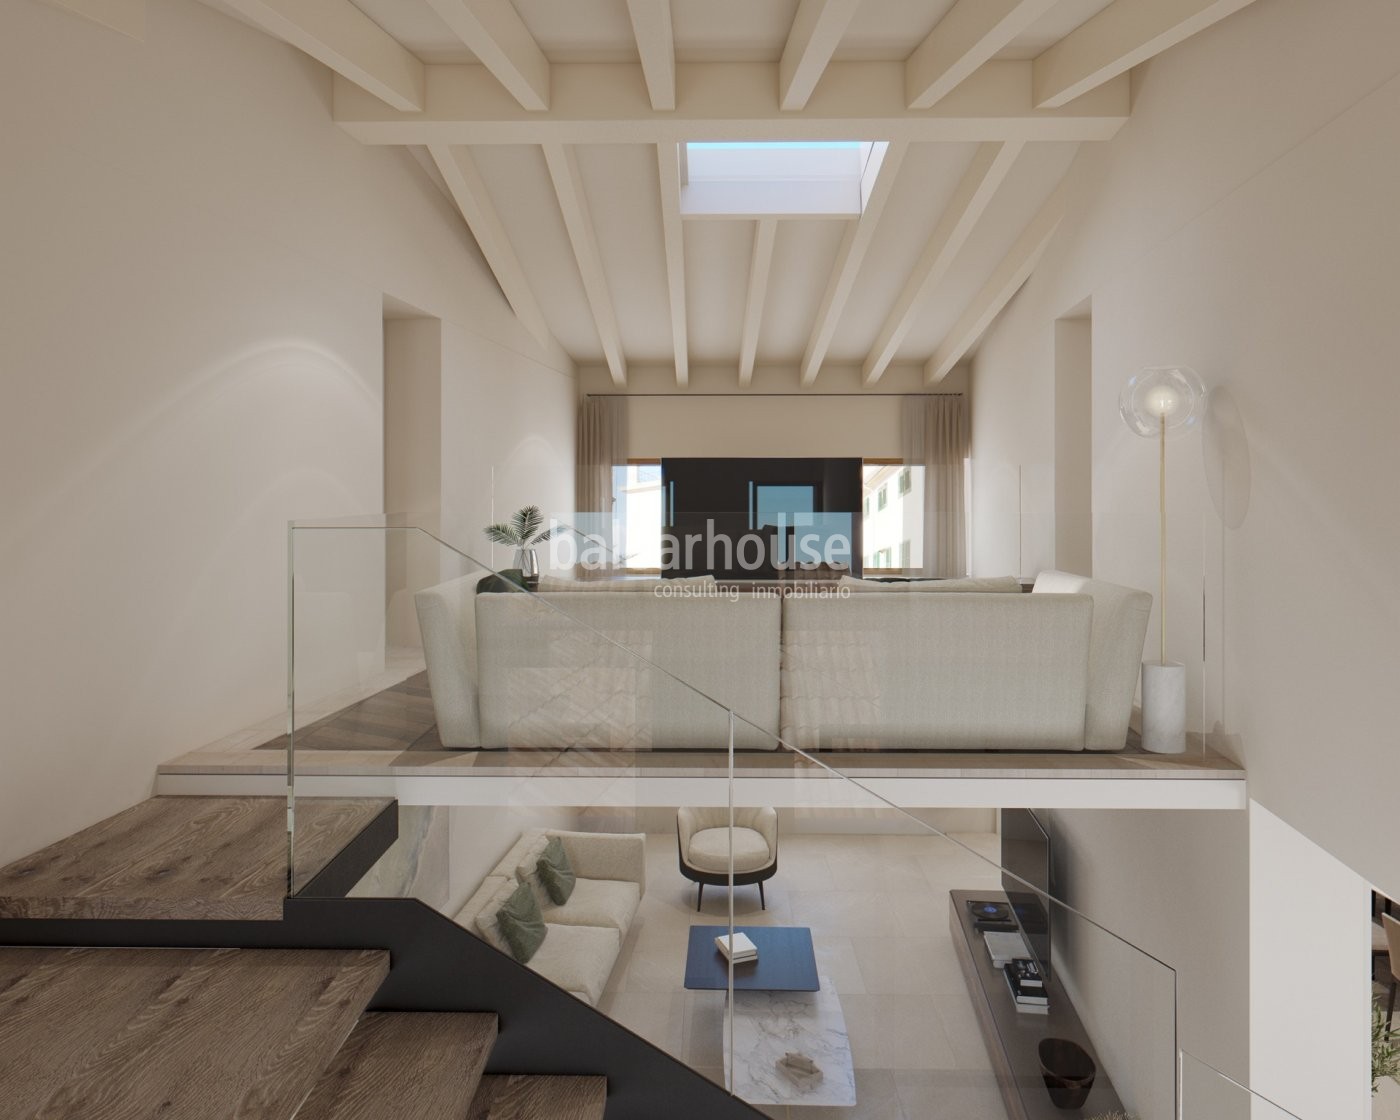 Elegant duplex flat in historic palace in the old town of Palma.